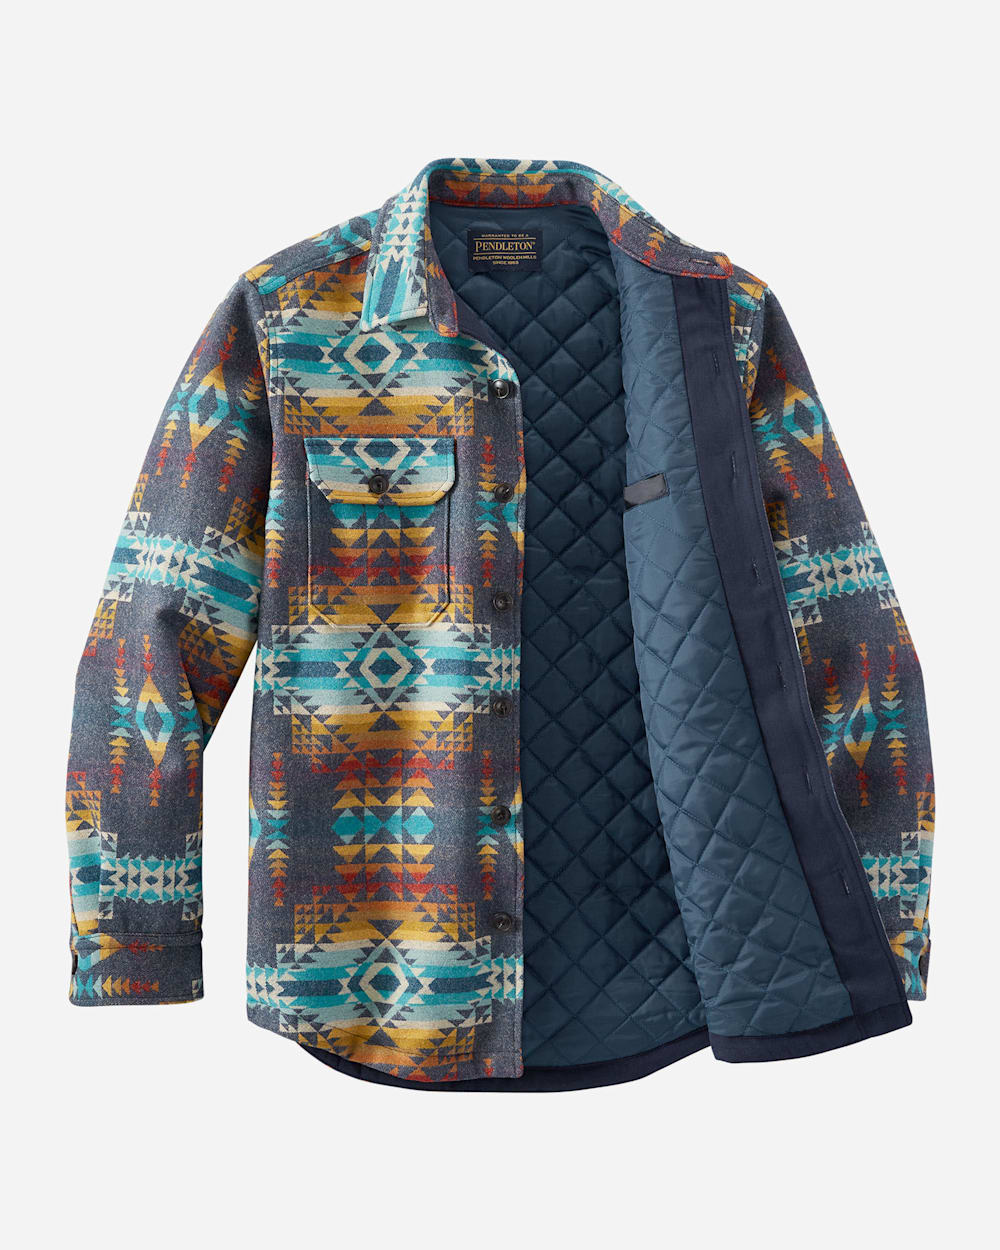 ALTERNATE VIEW OF MEN'S JACQUARD QUILTED SHIRT JACKET IN BLUE PILOT ROCK image number 3